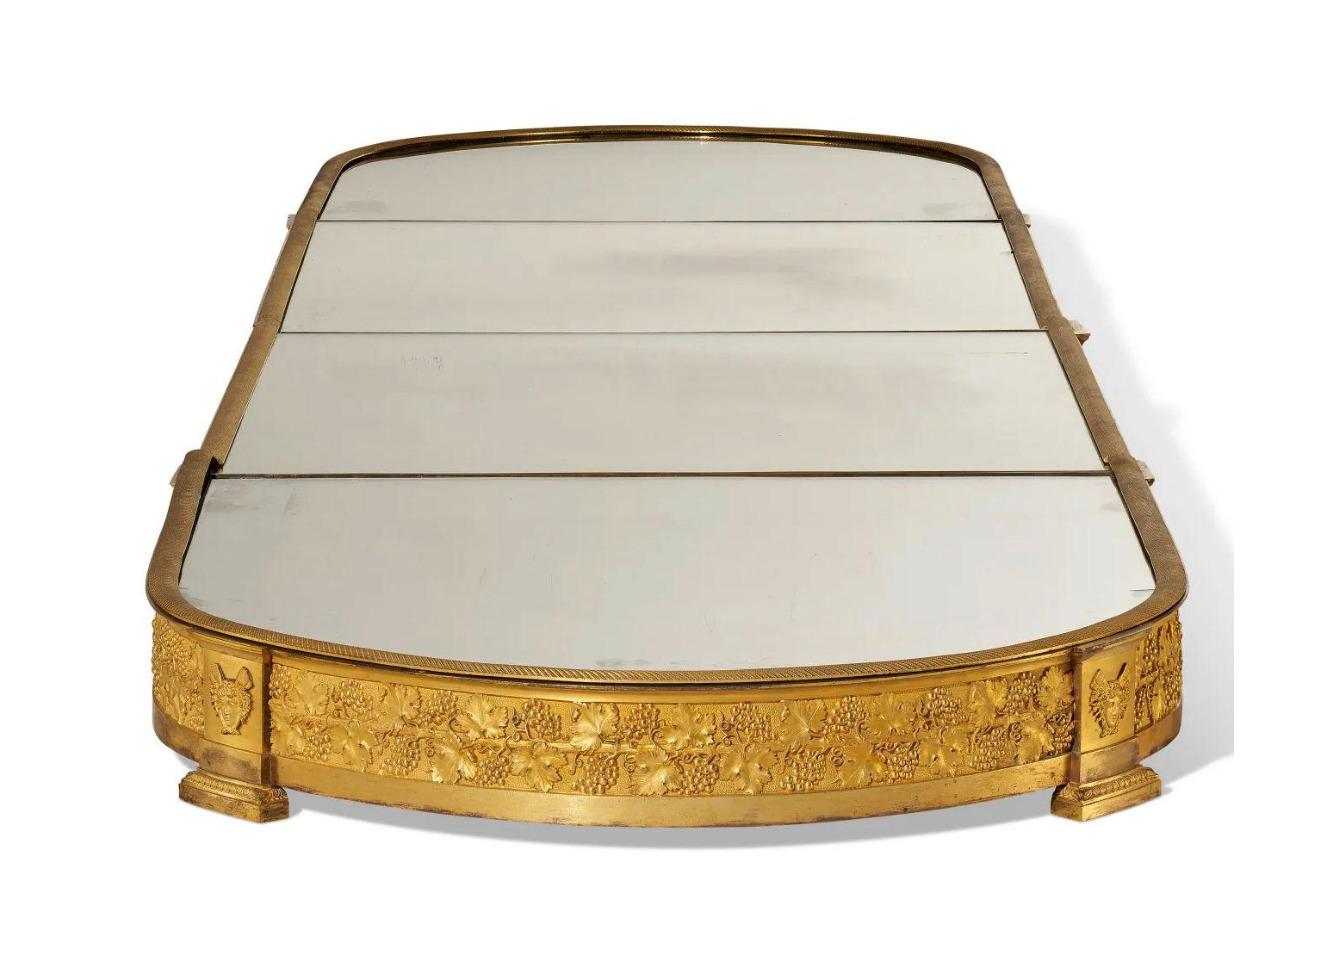 Mirror A Lavish French Empire Ormolu Surtout De Table, C. 1815, Attributed to Thomire For Sale